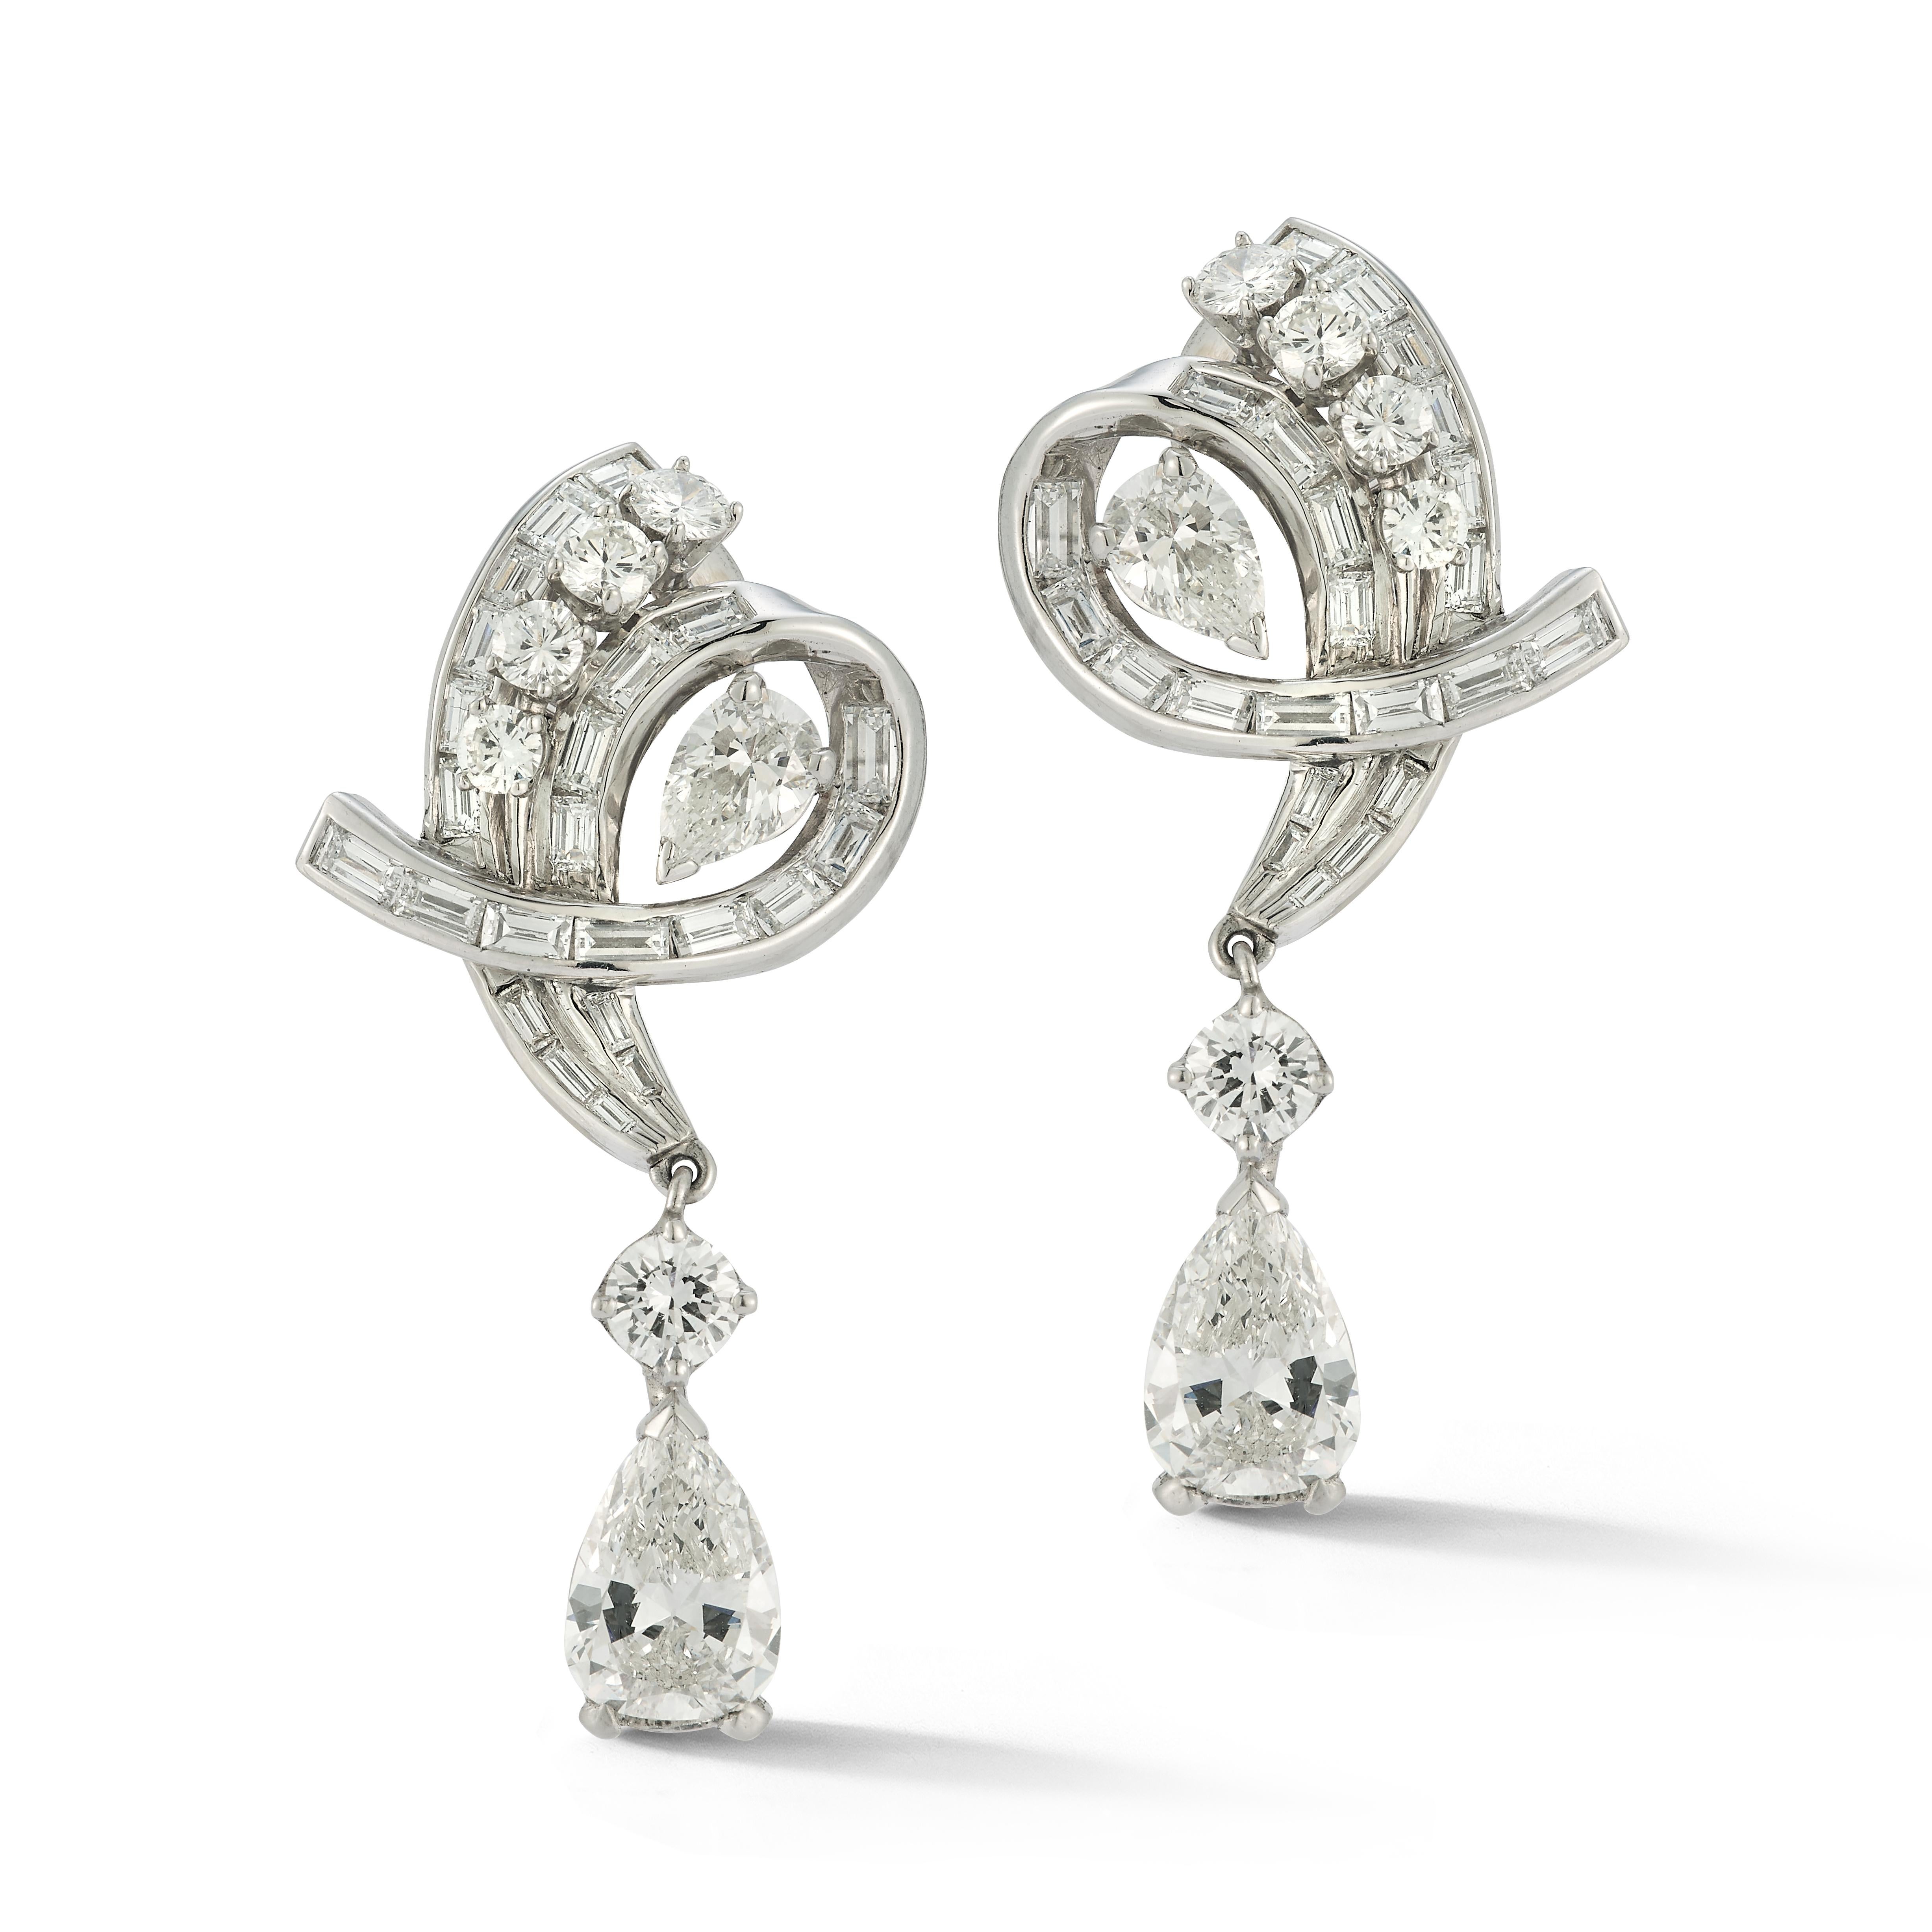 Vintage Certified Pear Shaped Diamond Earrings

A pair of white gold earrings set with 46 baguette cut diamonds, 10 round cut diamonds, and 4 pear shaped diamonds. 

Accompanied by 2 GIA reports for the 2 pear shaped diamond drops

GIA Pear Shaped